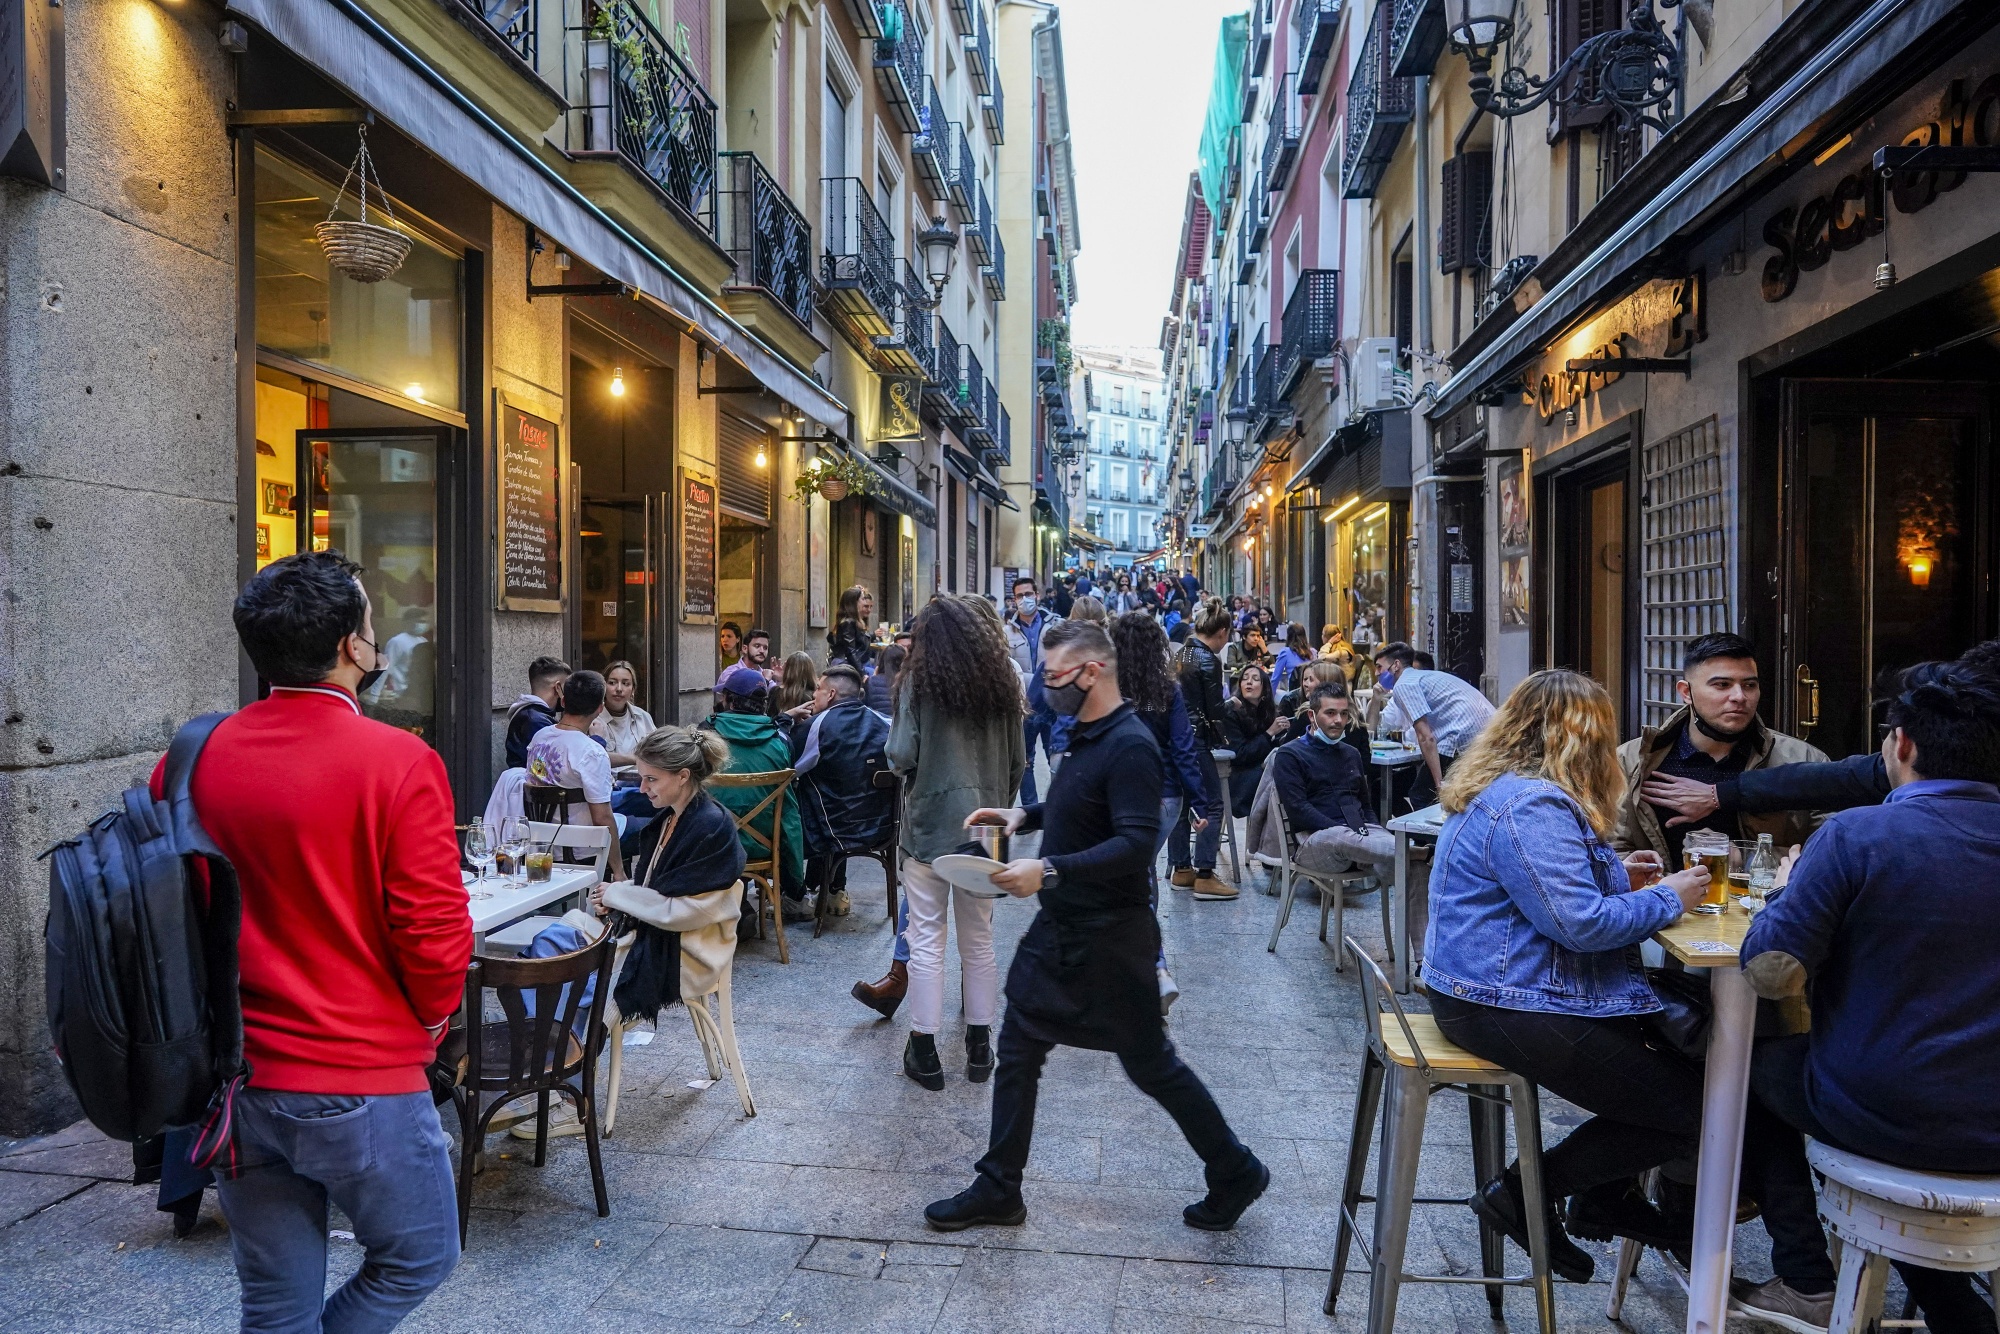 Joining this Madrid street scene and other travel destinations would be easier with set standards and guidelines.&nbsp;